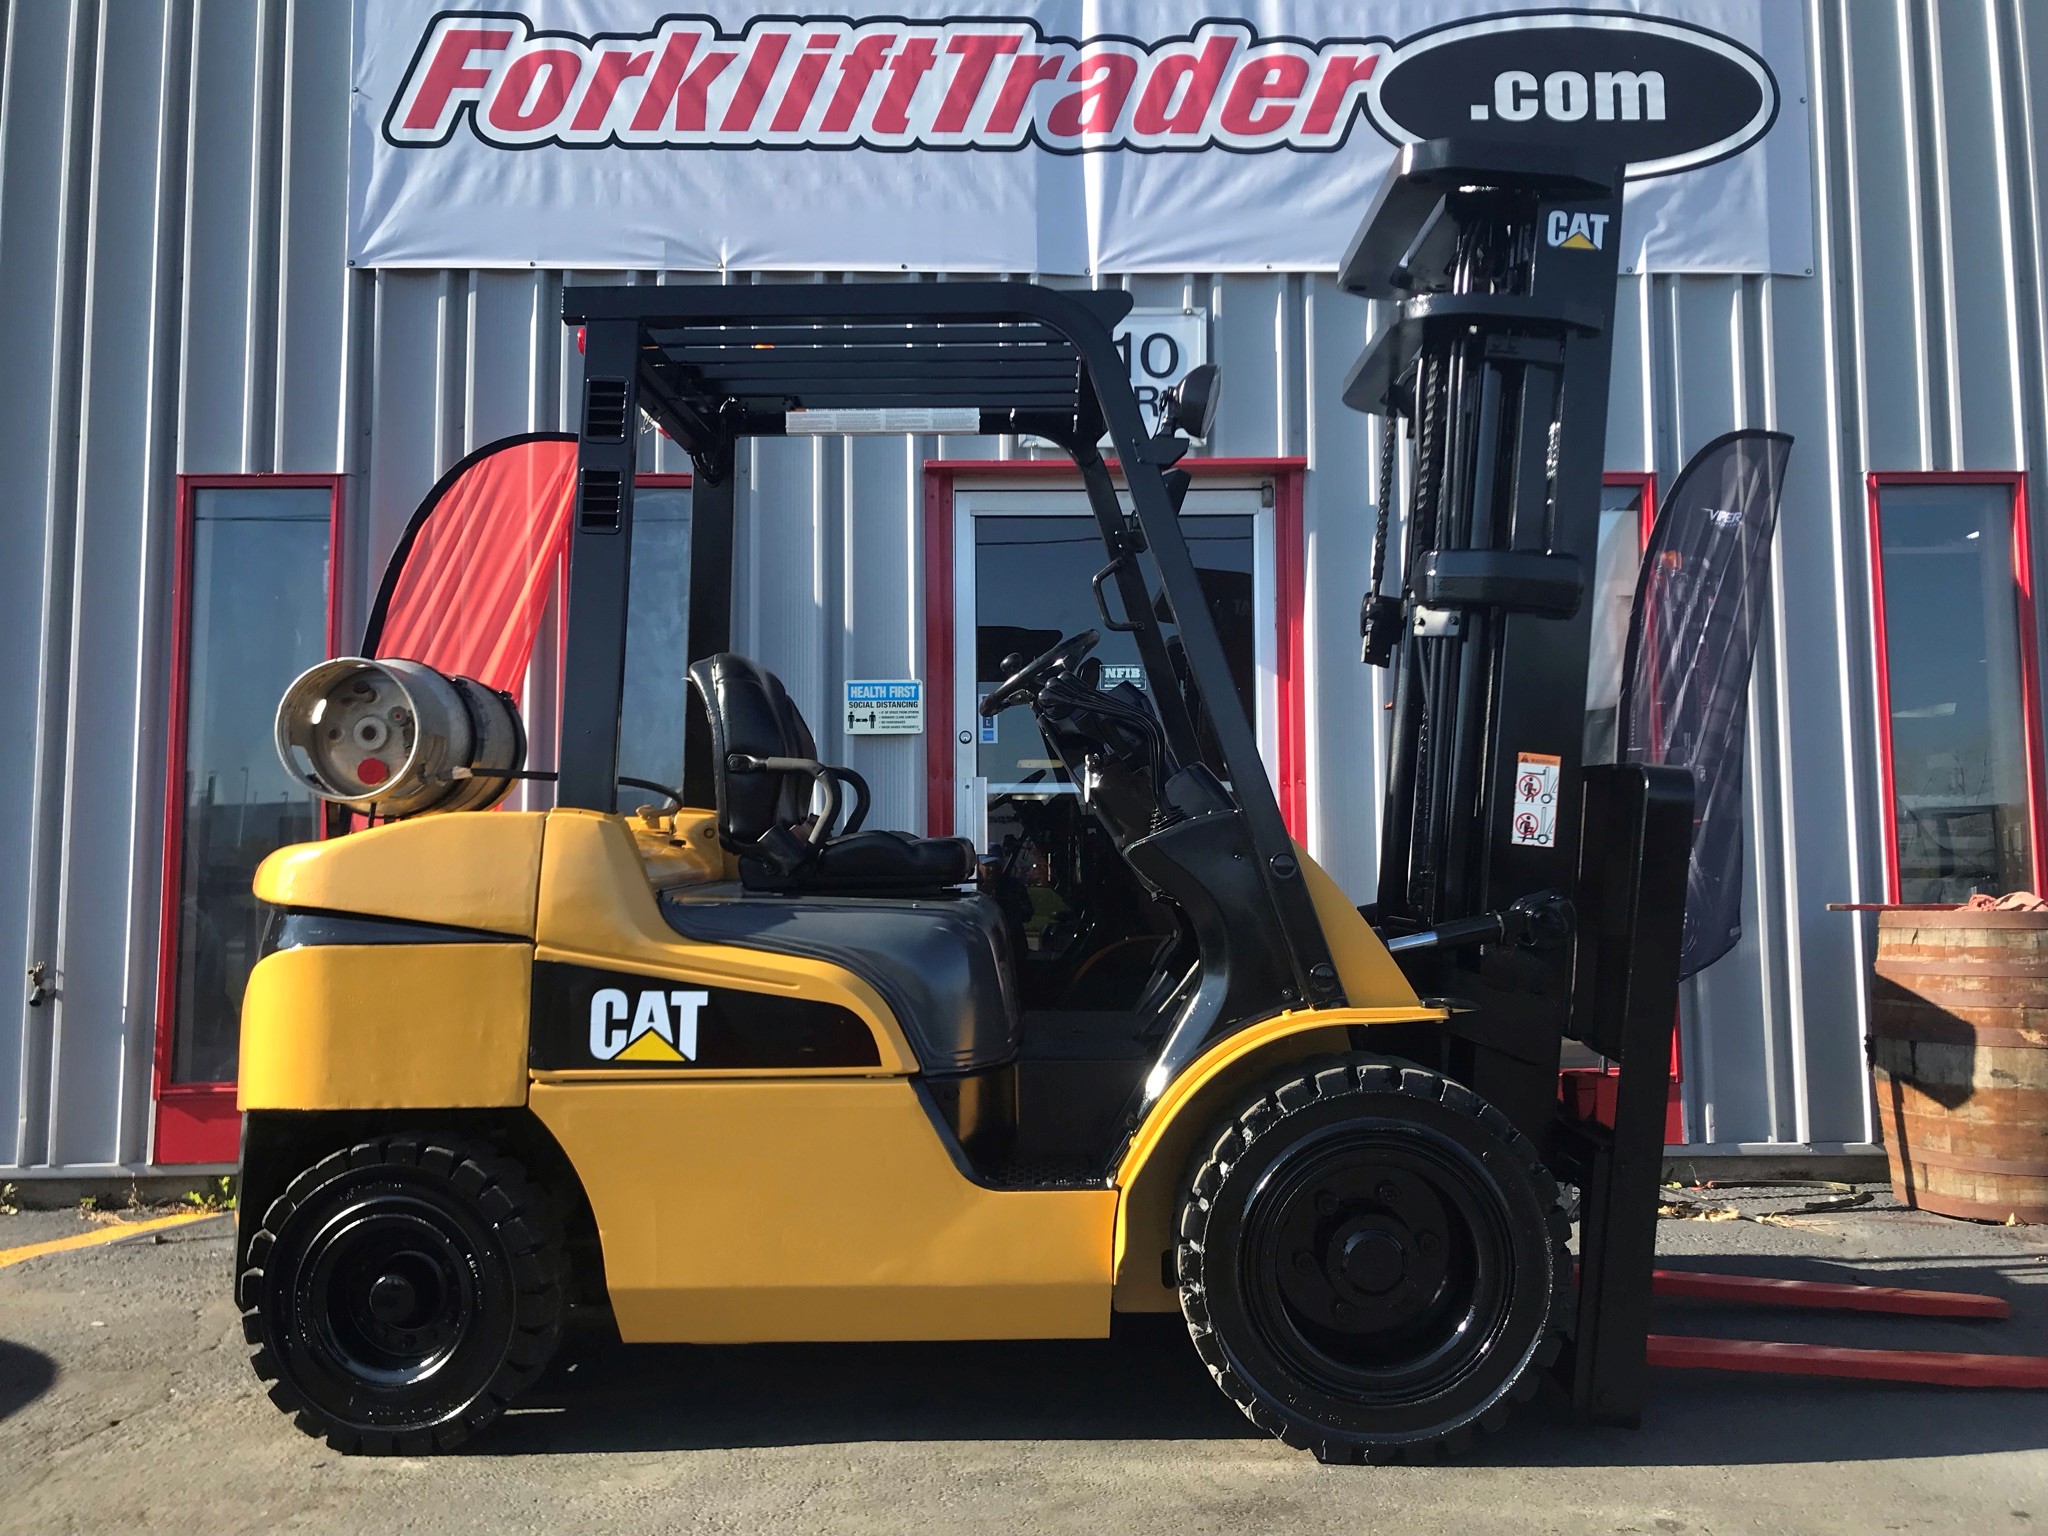 2005 yellow cat forklift with 4 stage mast for sale